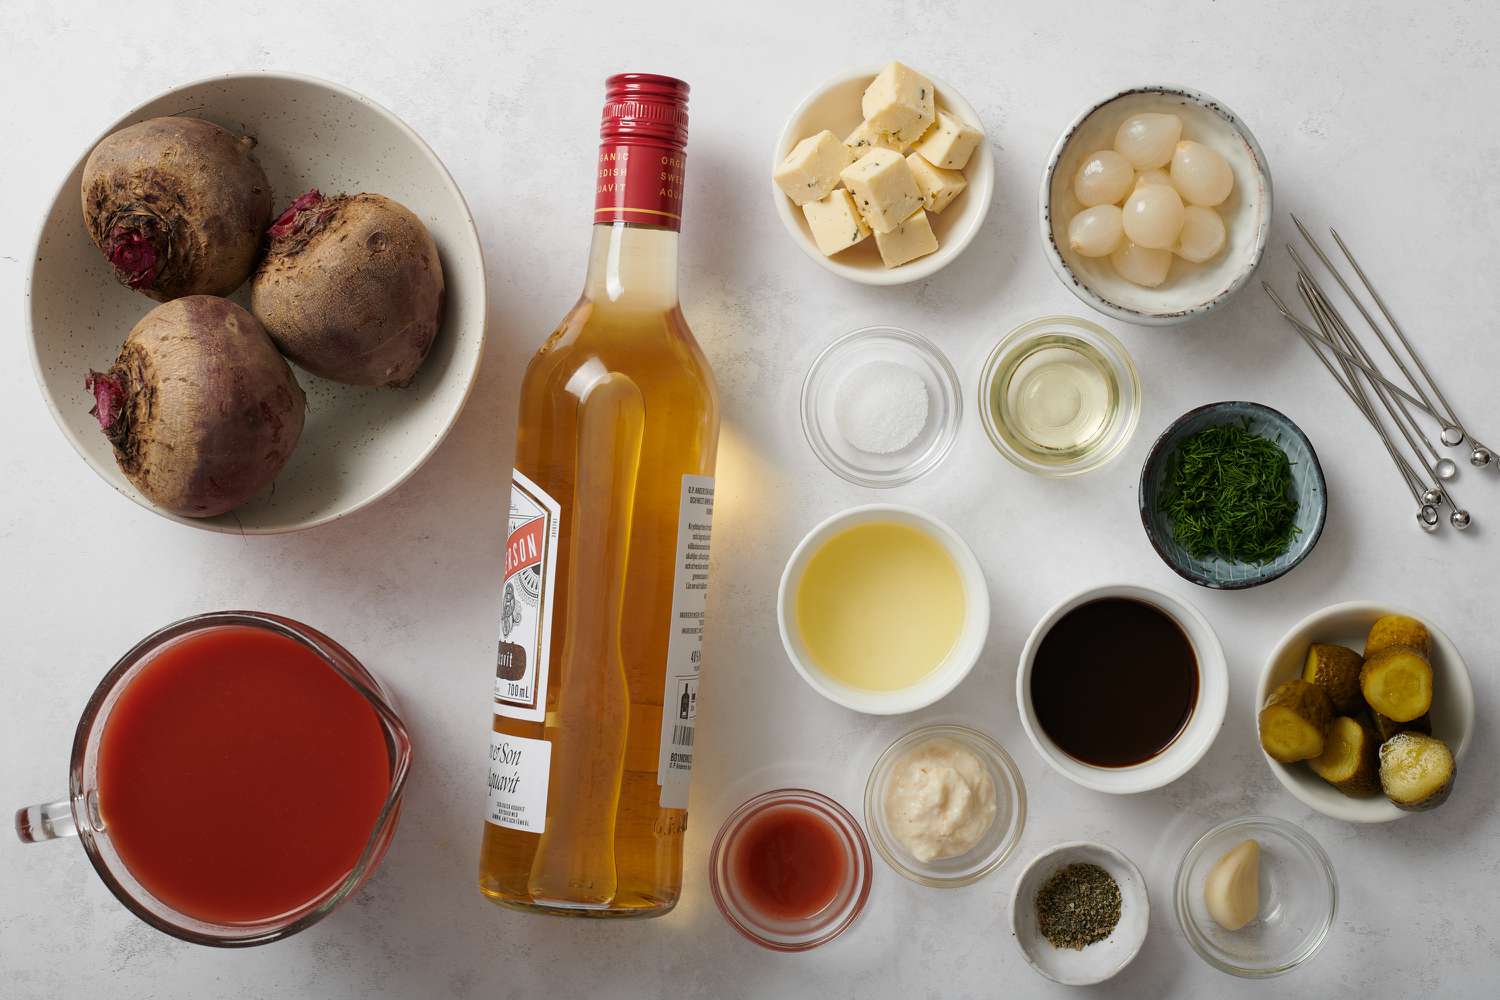 Ingredients to make a Beet and Aquavit Bloody Mary